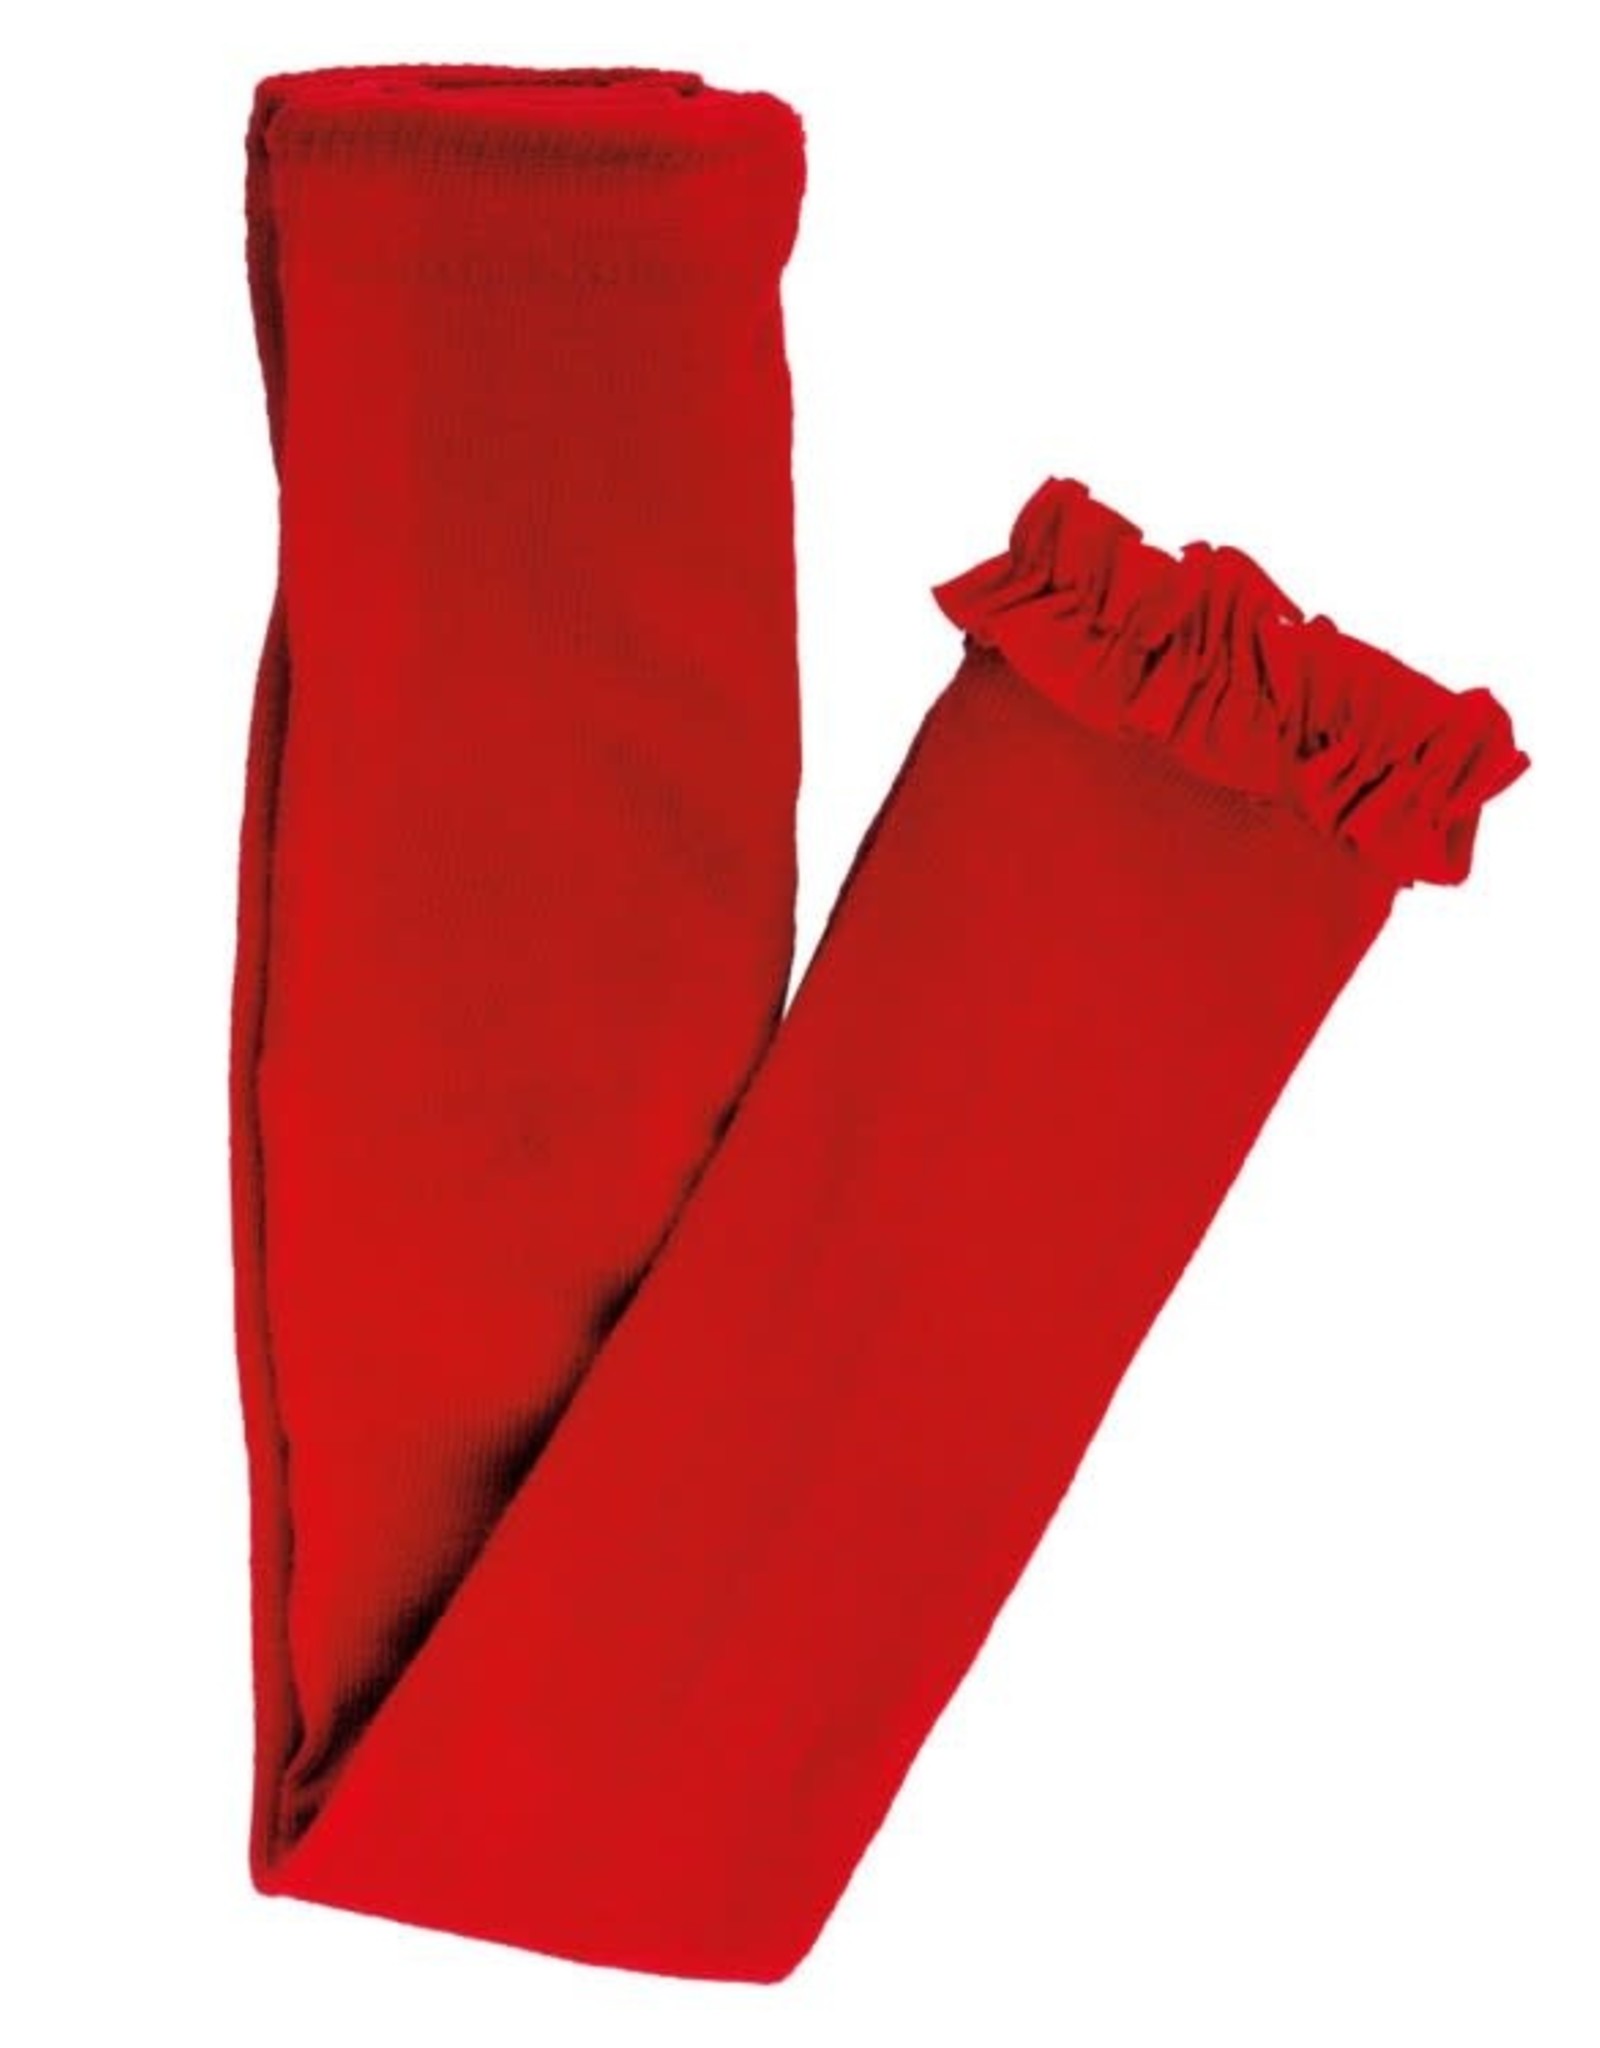 RuffleButts Red Footless Ruffle Tights